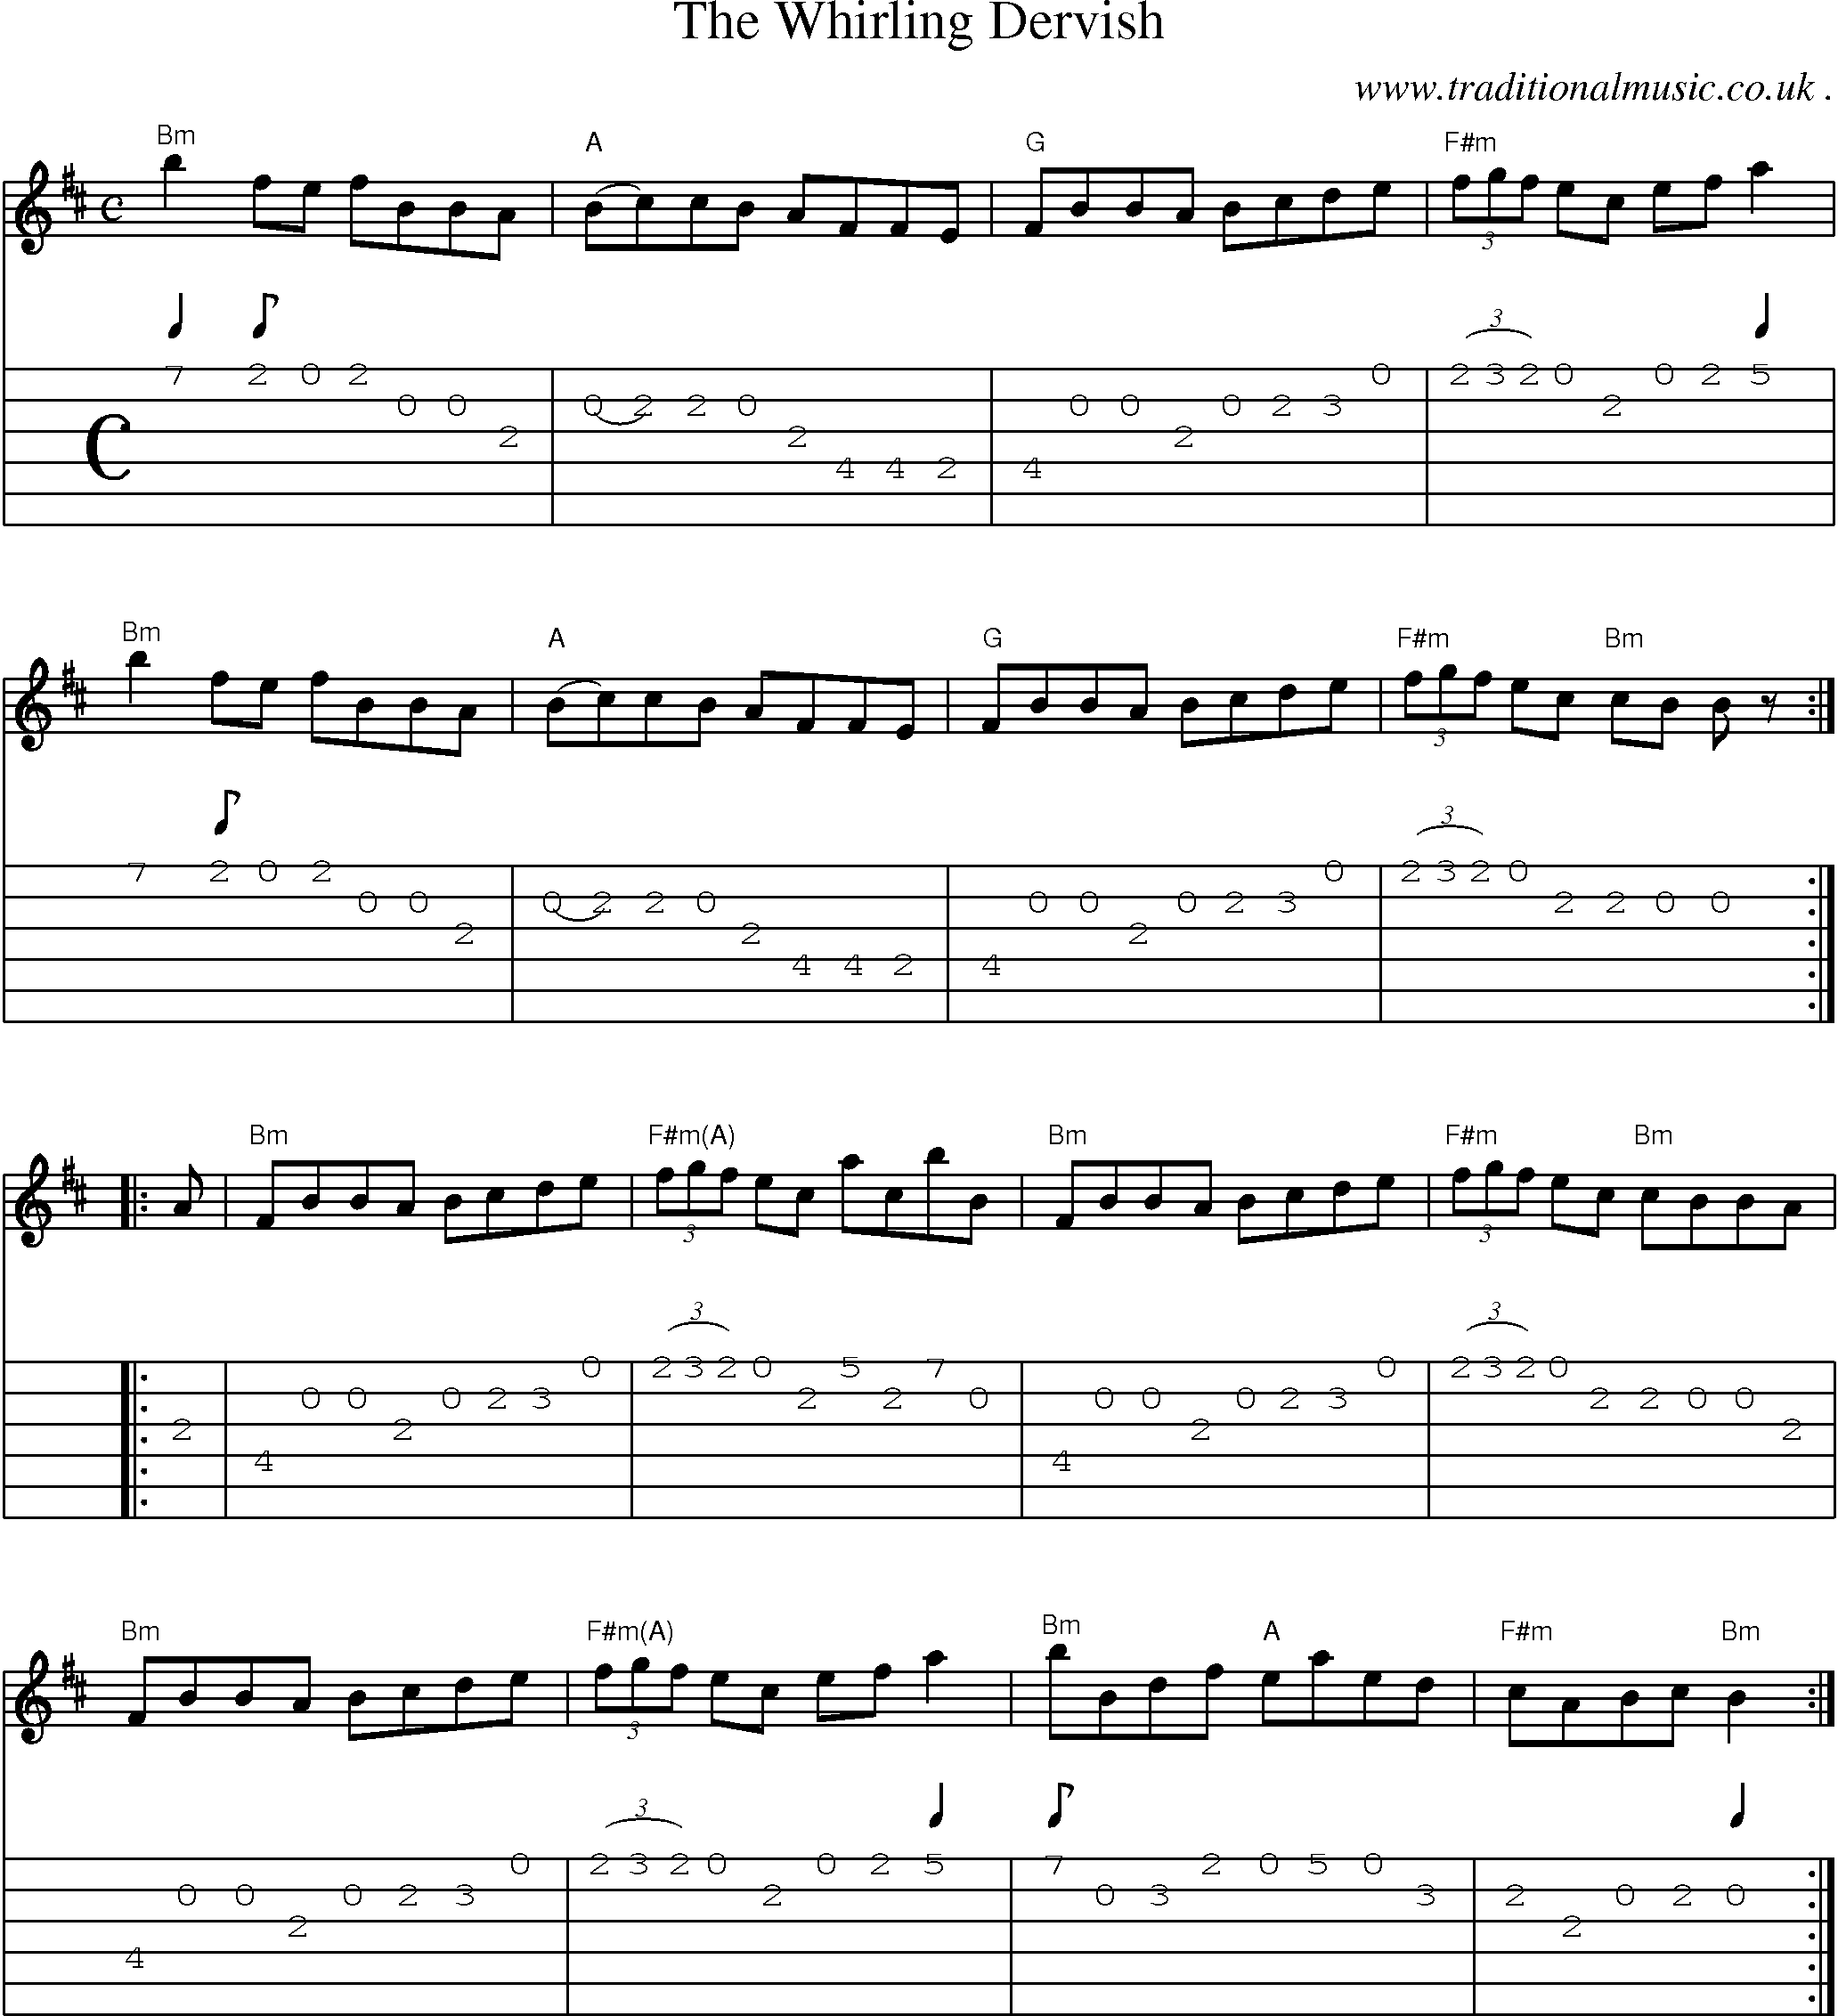 Music Score and Guitar Tabs for The Whirling Dervish